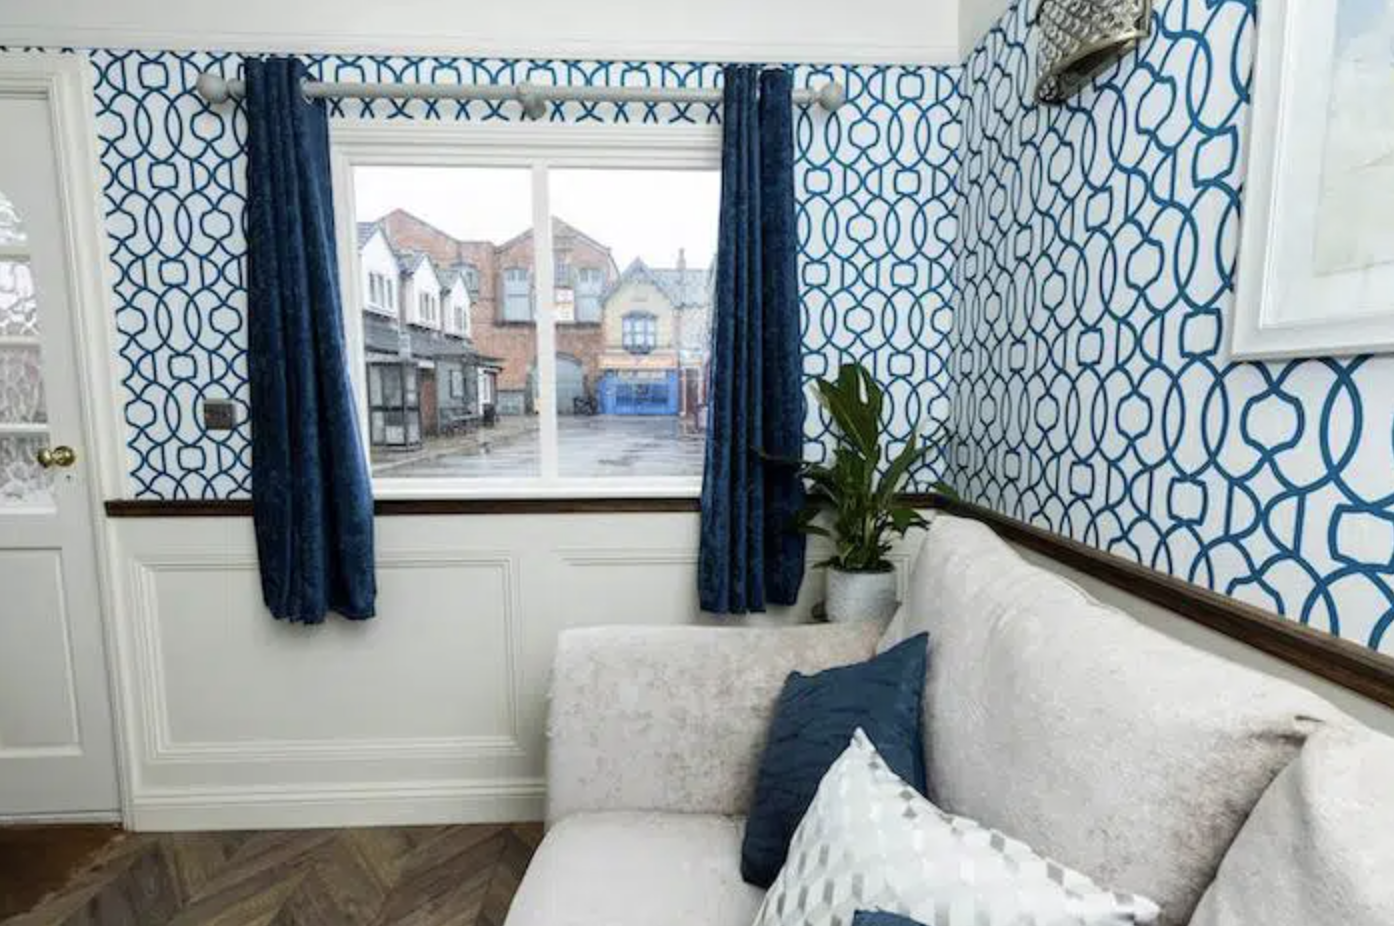 You and a guest can now stay on the set of Coronation Street, The Manc